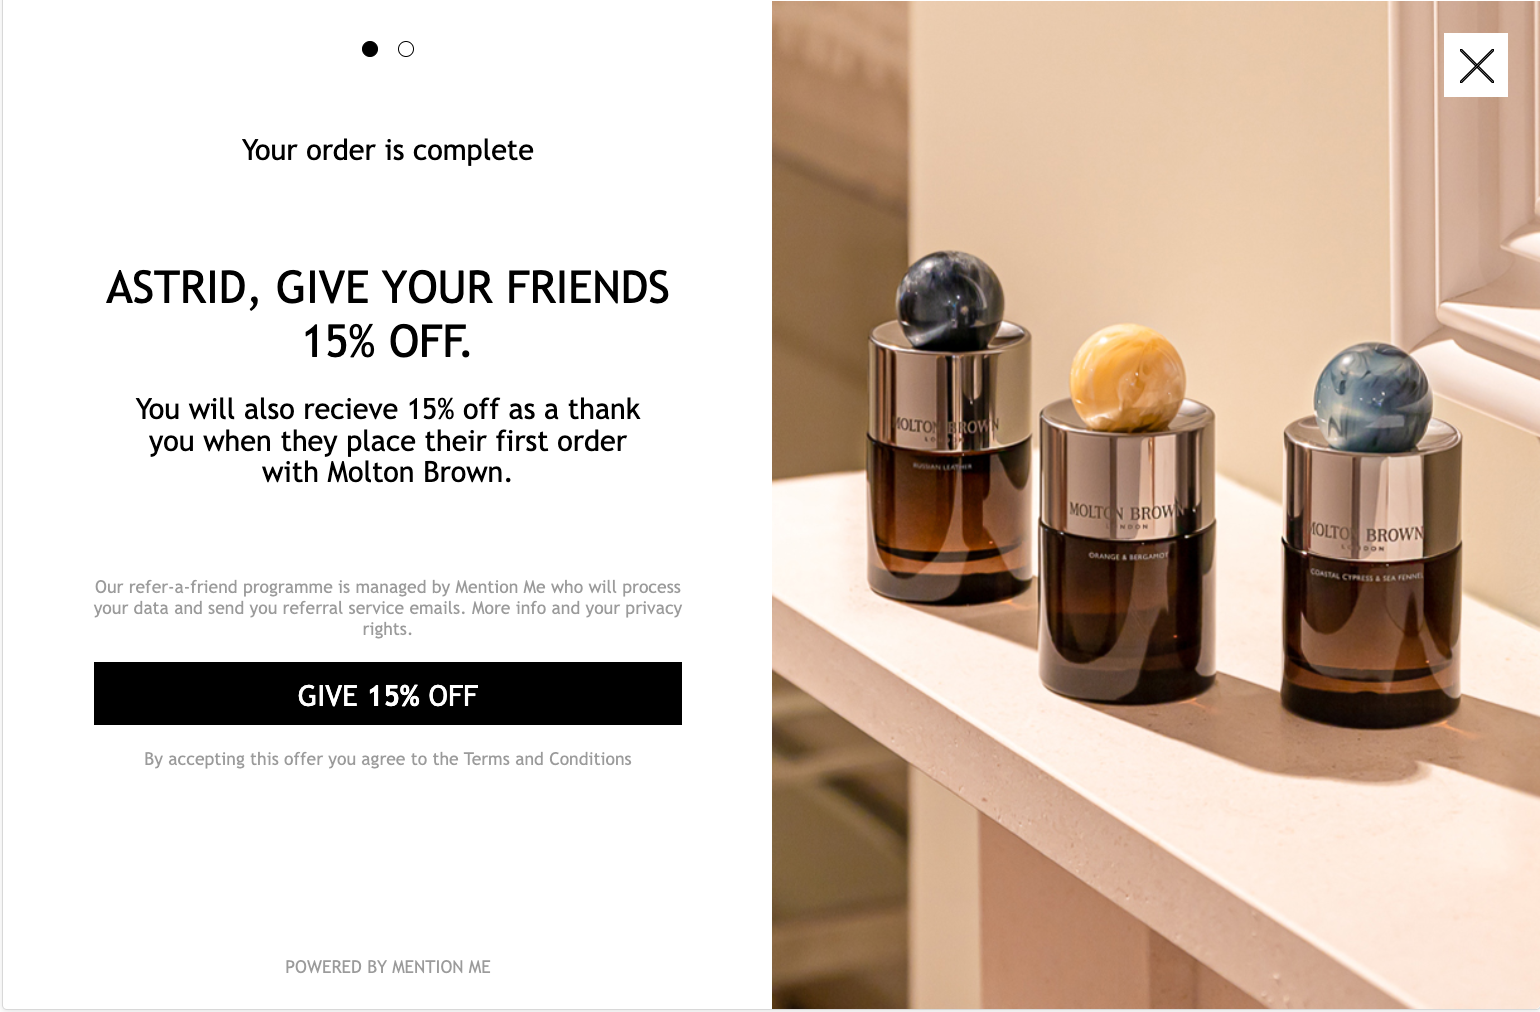 Molton Brown refer-a-friend example